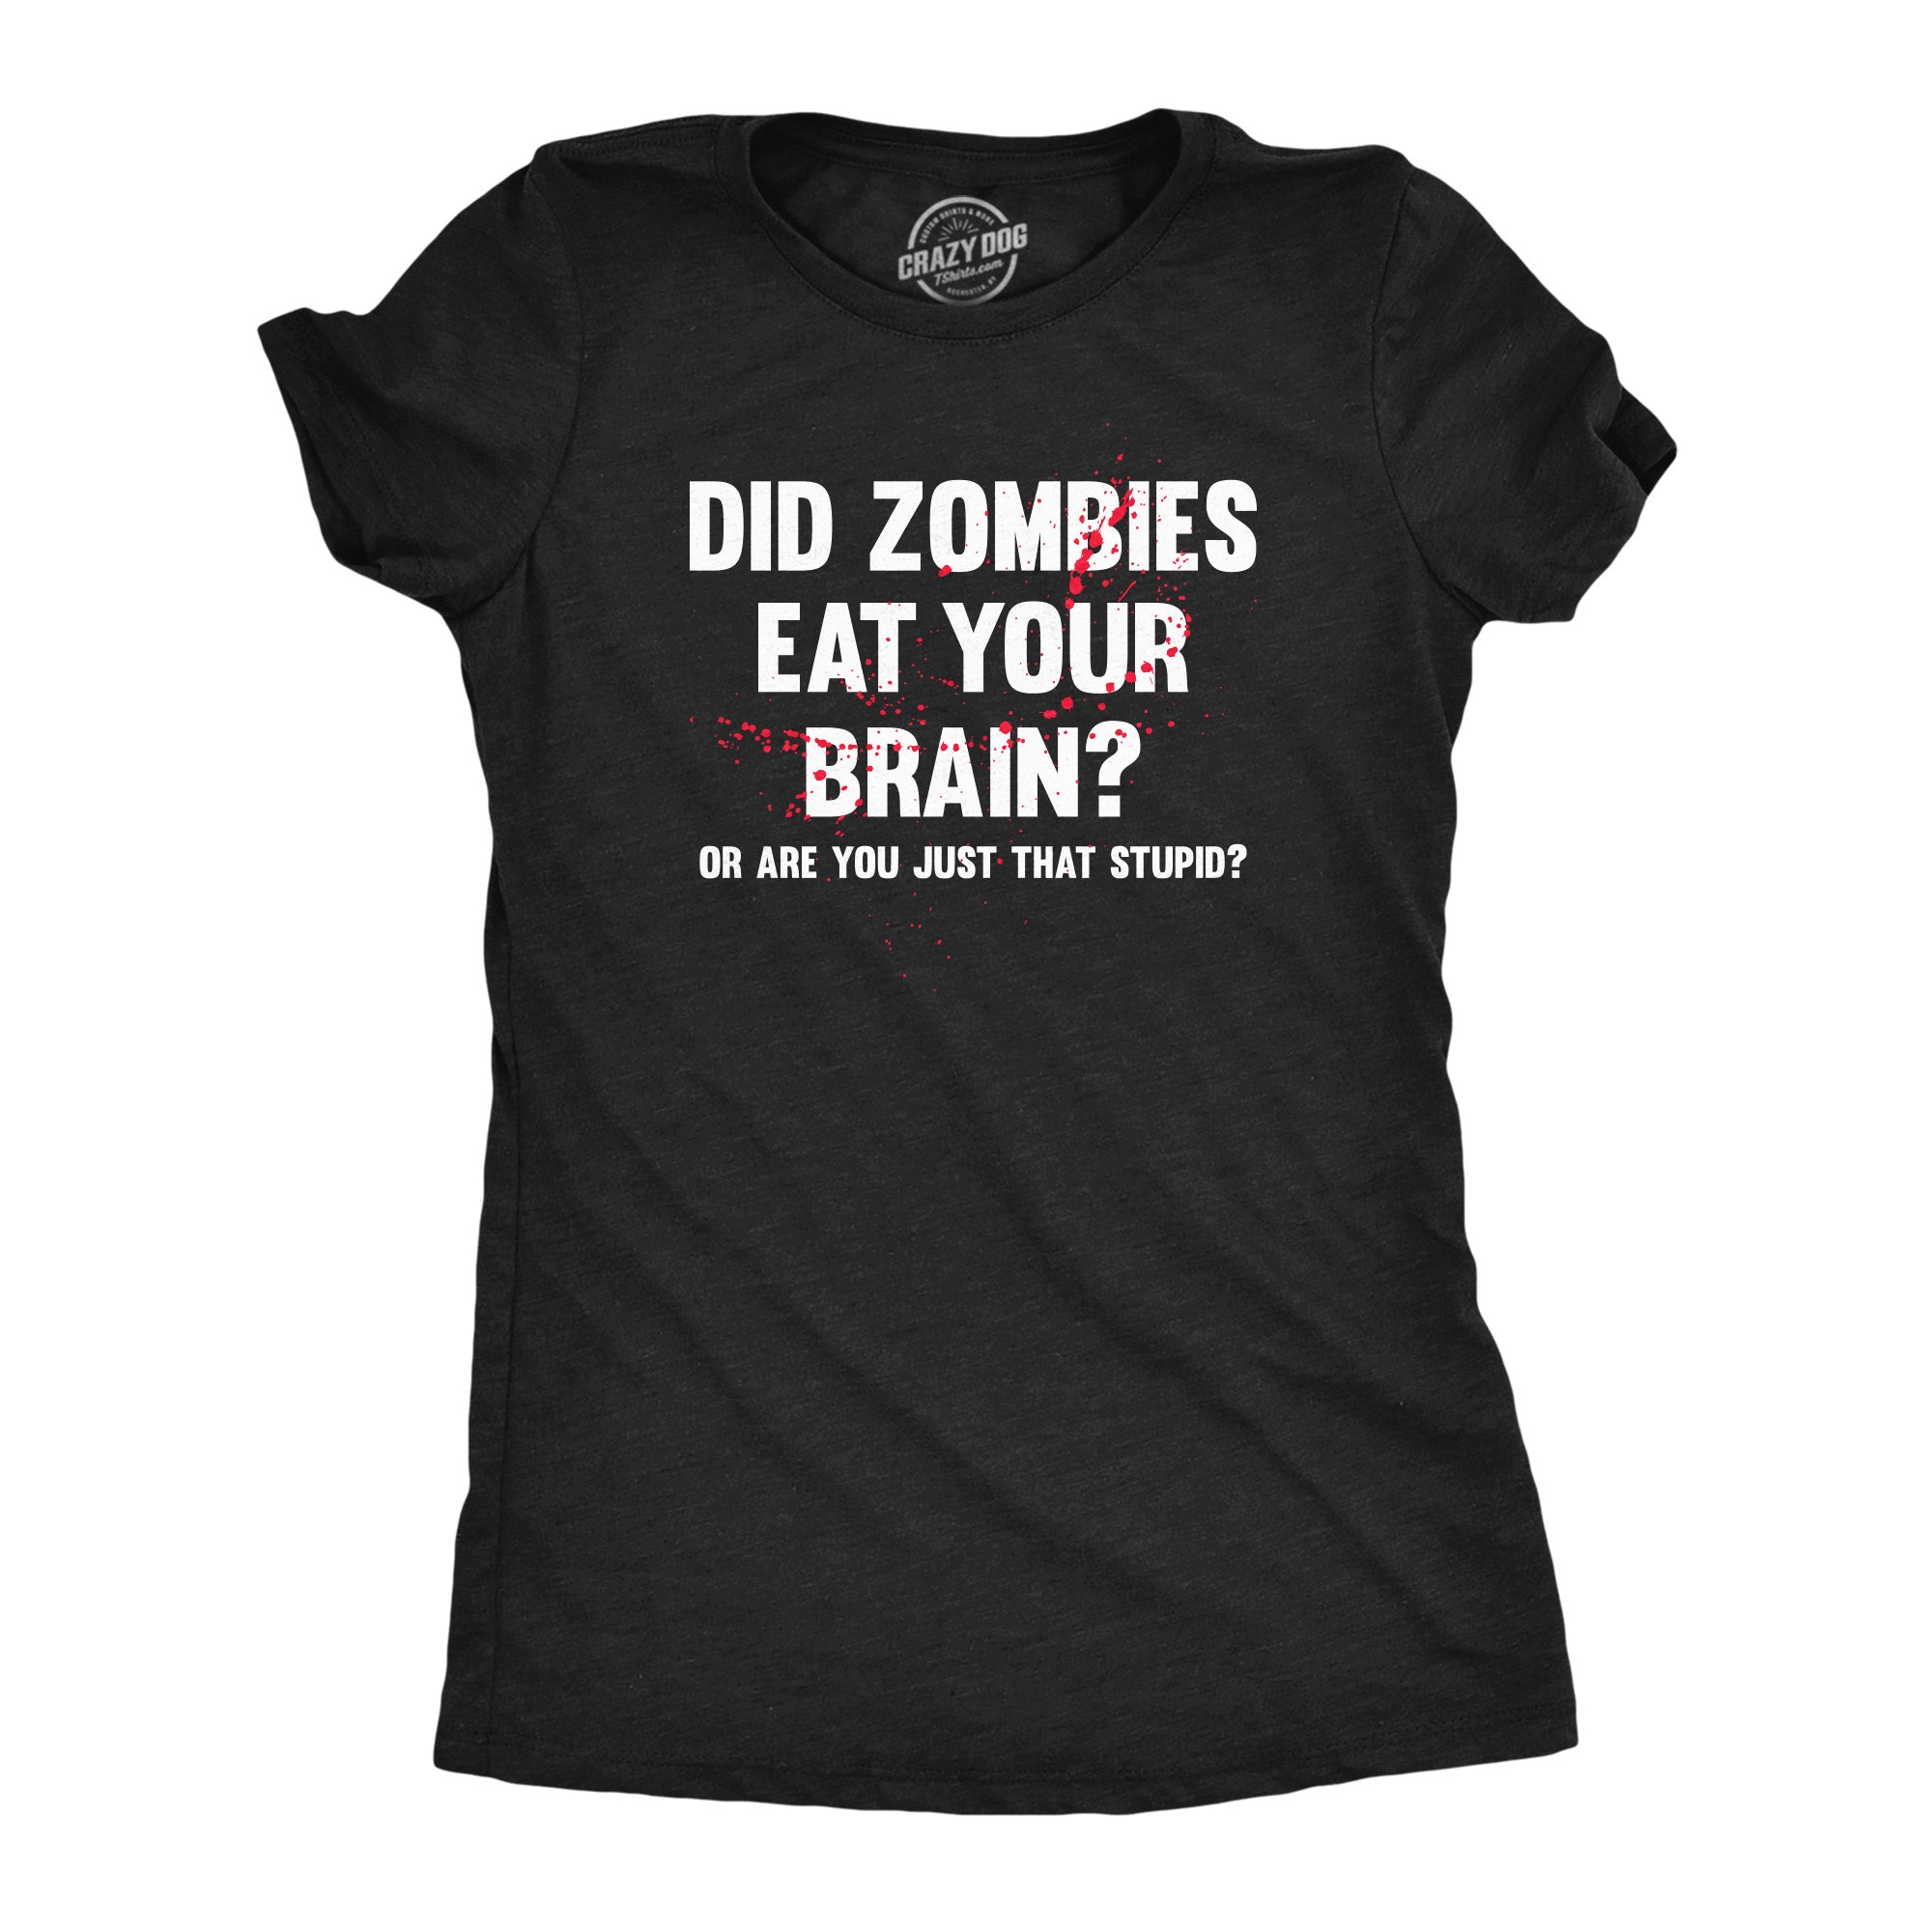 Funny Heather Black - BRAIN Did Zombies Eat Your Brain Or Are You Just That Stupid Womens T Shirt Nerdy zombie sarcastic Tee